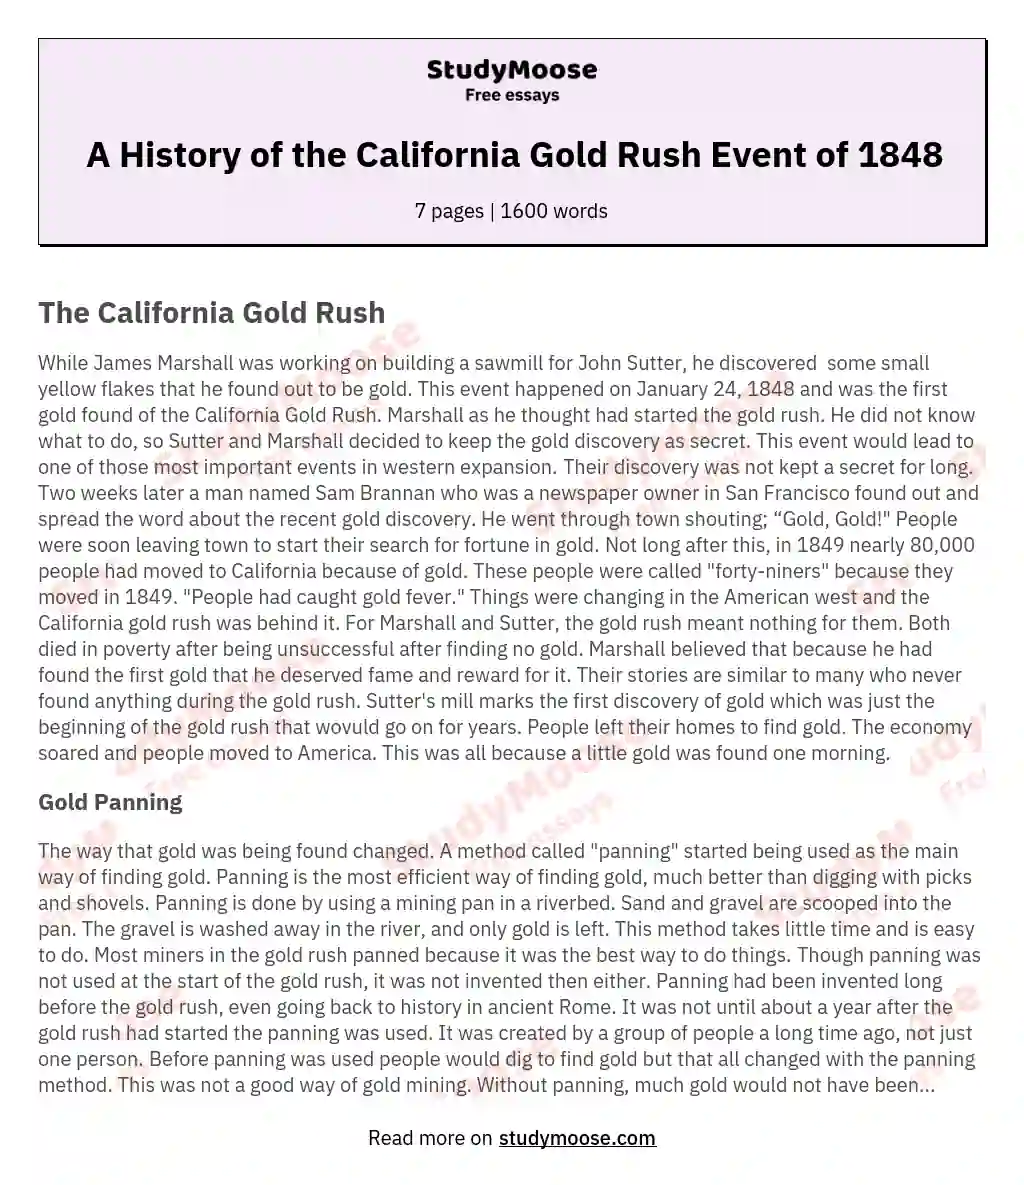 Impact of California Gold Rush on Western Expansion essay